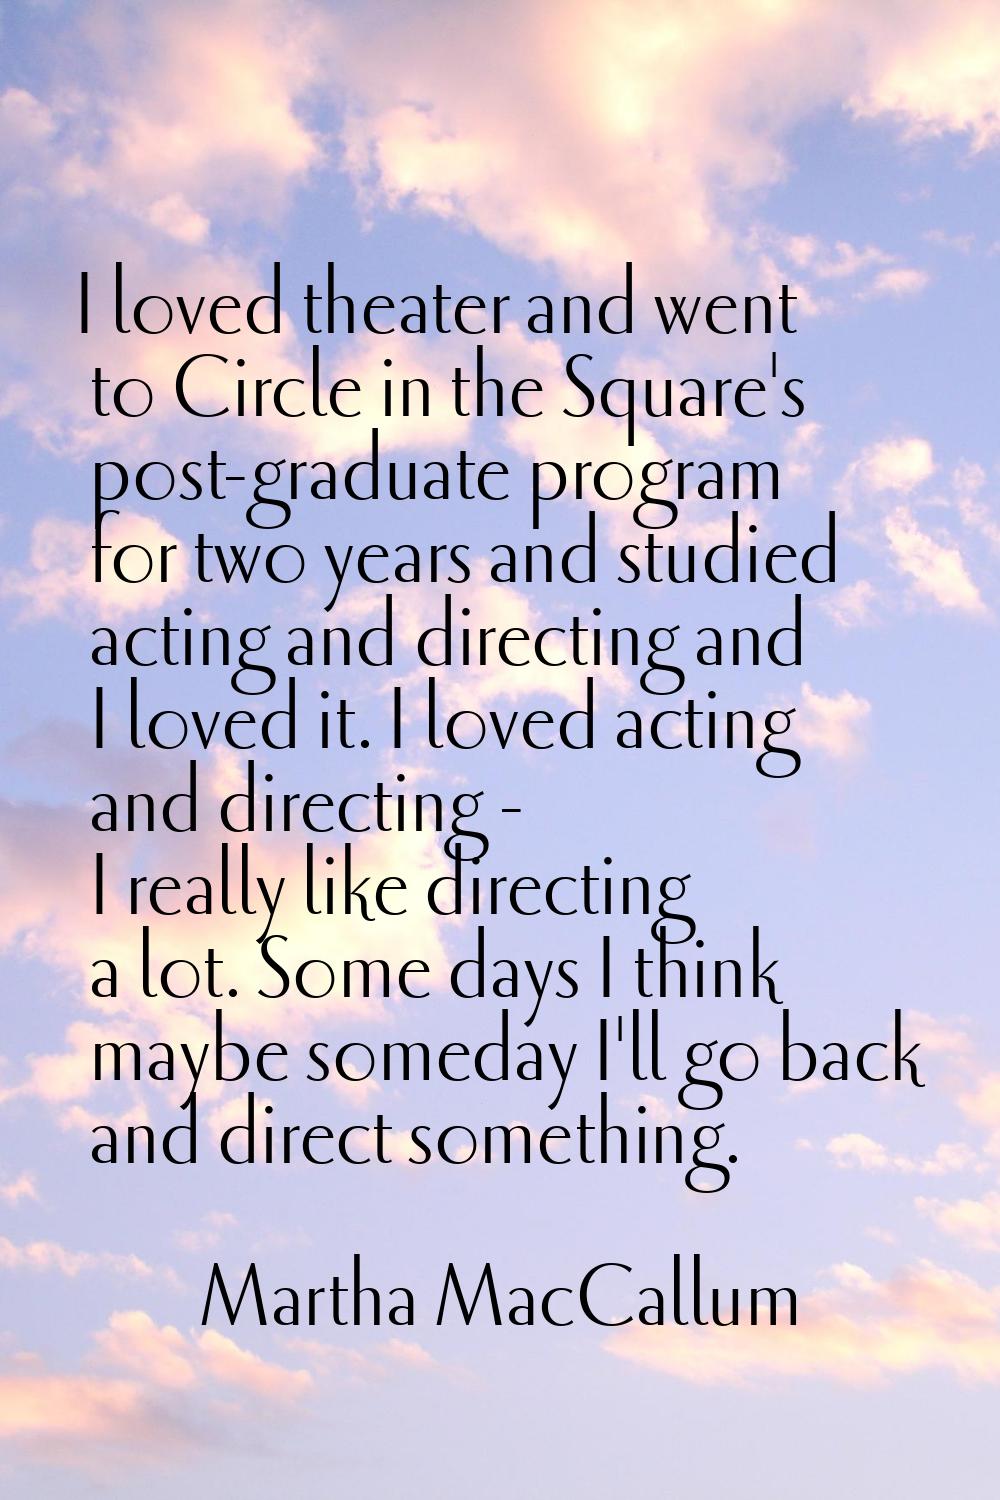 I loved theater and went to Circle in the Square's post-graduate program for two years and studied 